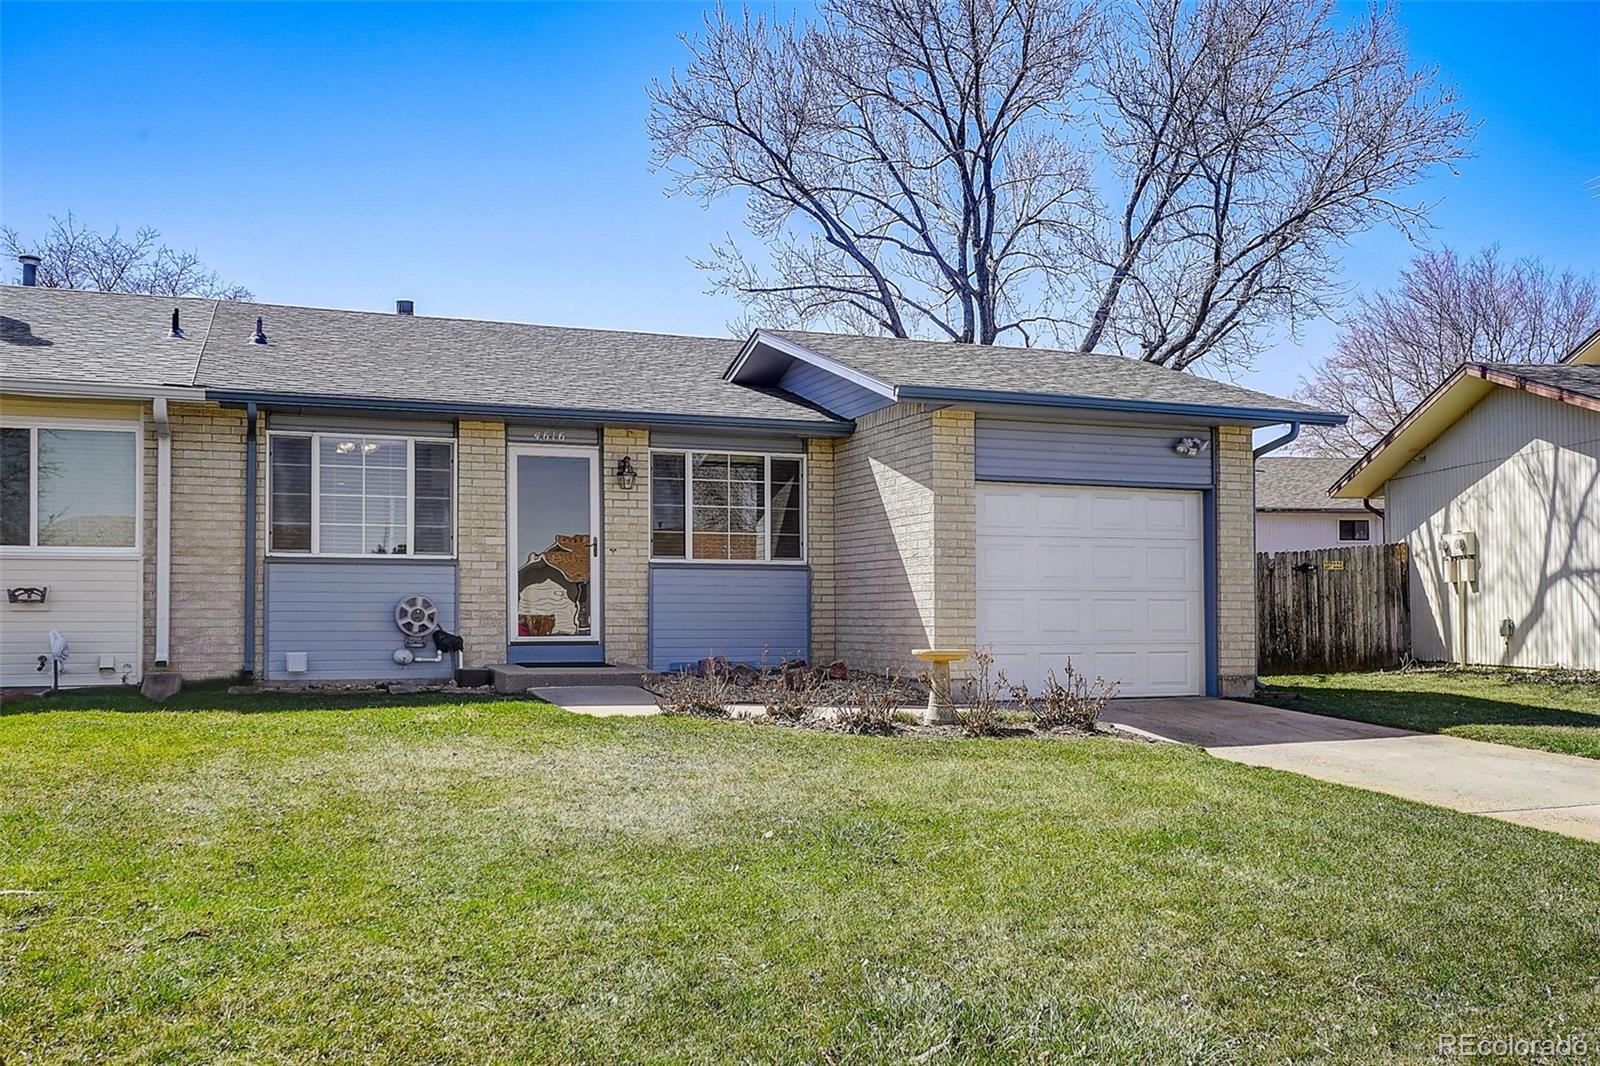 Report Image for 4616 W 5th Street,Greeley, Colorado